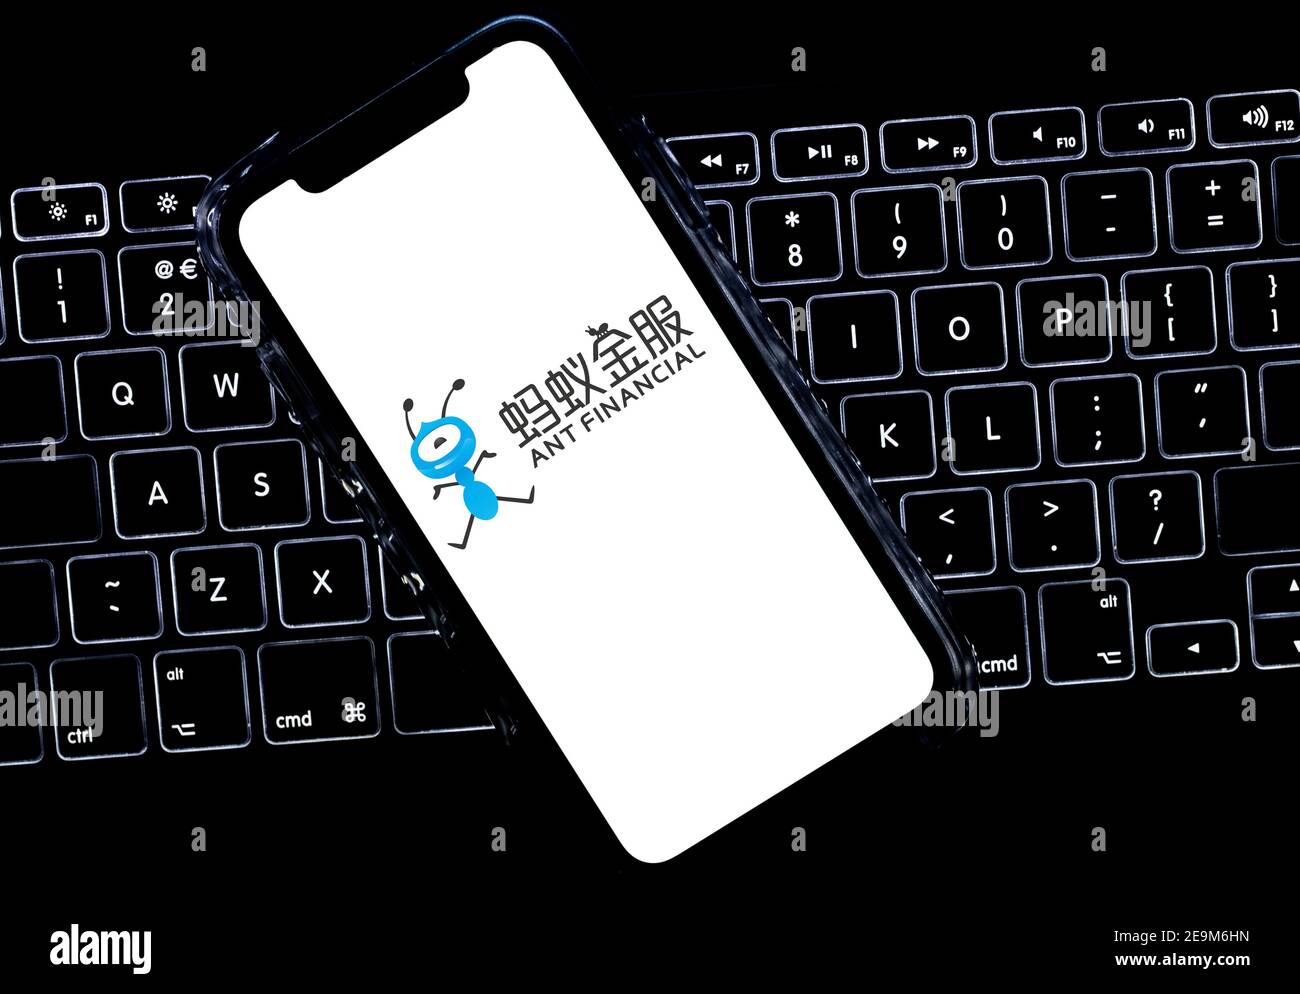 Ant Financial logo displayed on a mobile phone. (Editorial use only) Stock Photo